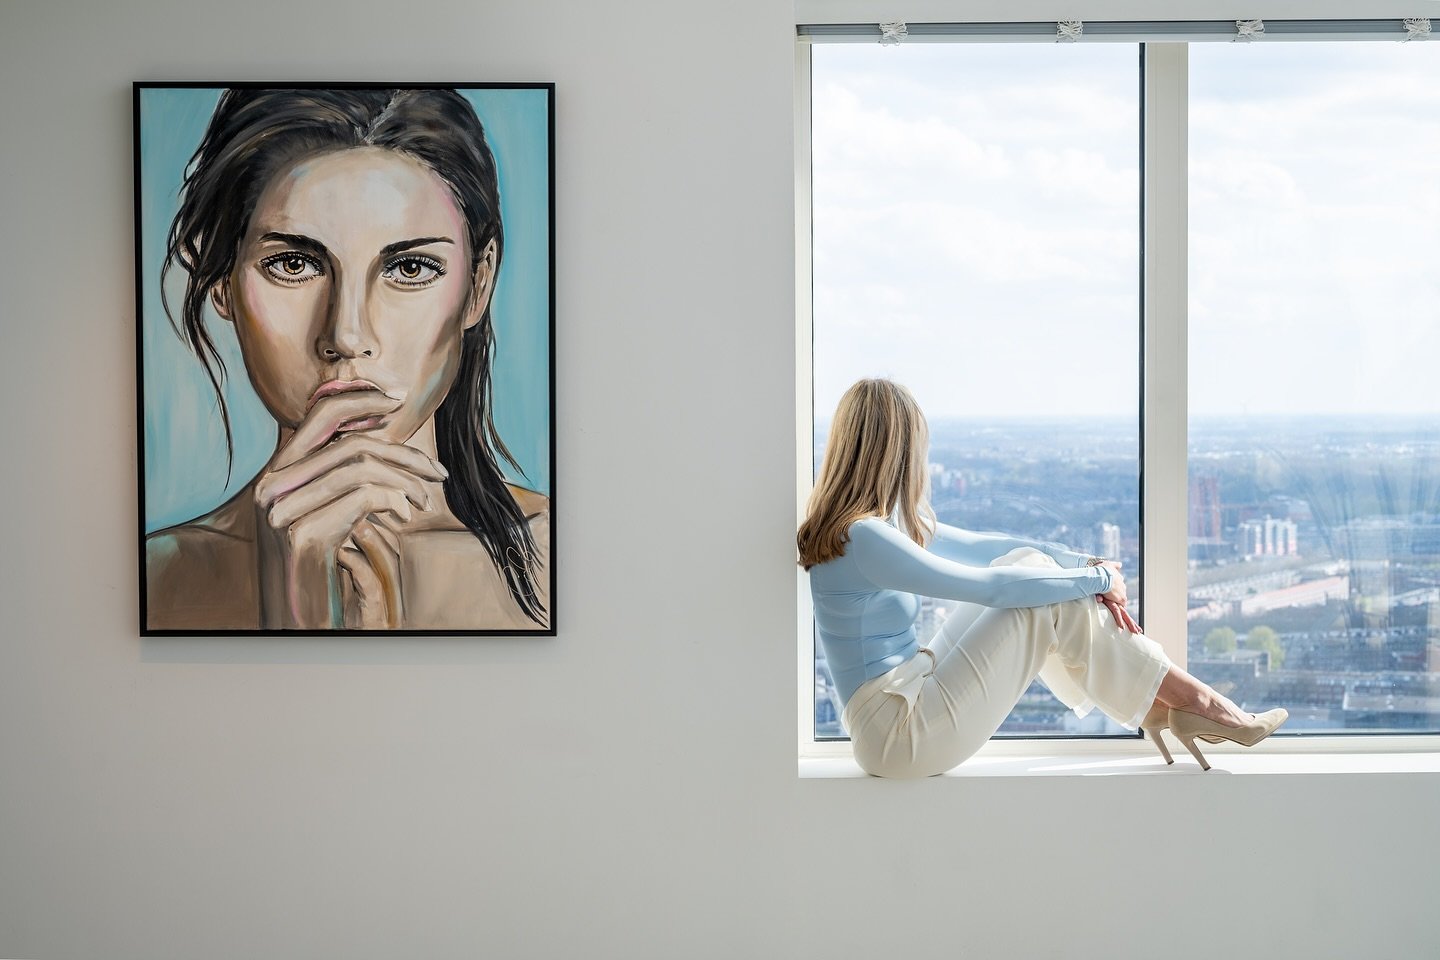 Top views: showcasing Evangeline&rsquo;s artwork in the penthouse, as I reflect on the endless possibilities ahead while taking in the cityscape view from the top floor.

#penthouse #viewsfordays #interiordesign #luxuryhomes #artforyourhome #rotterda